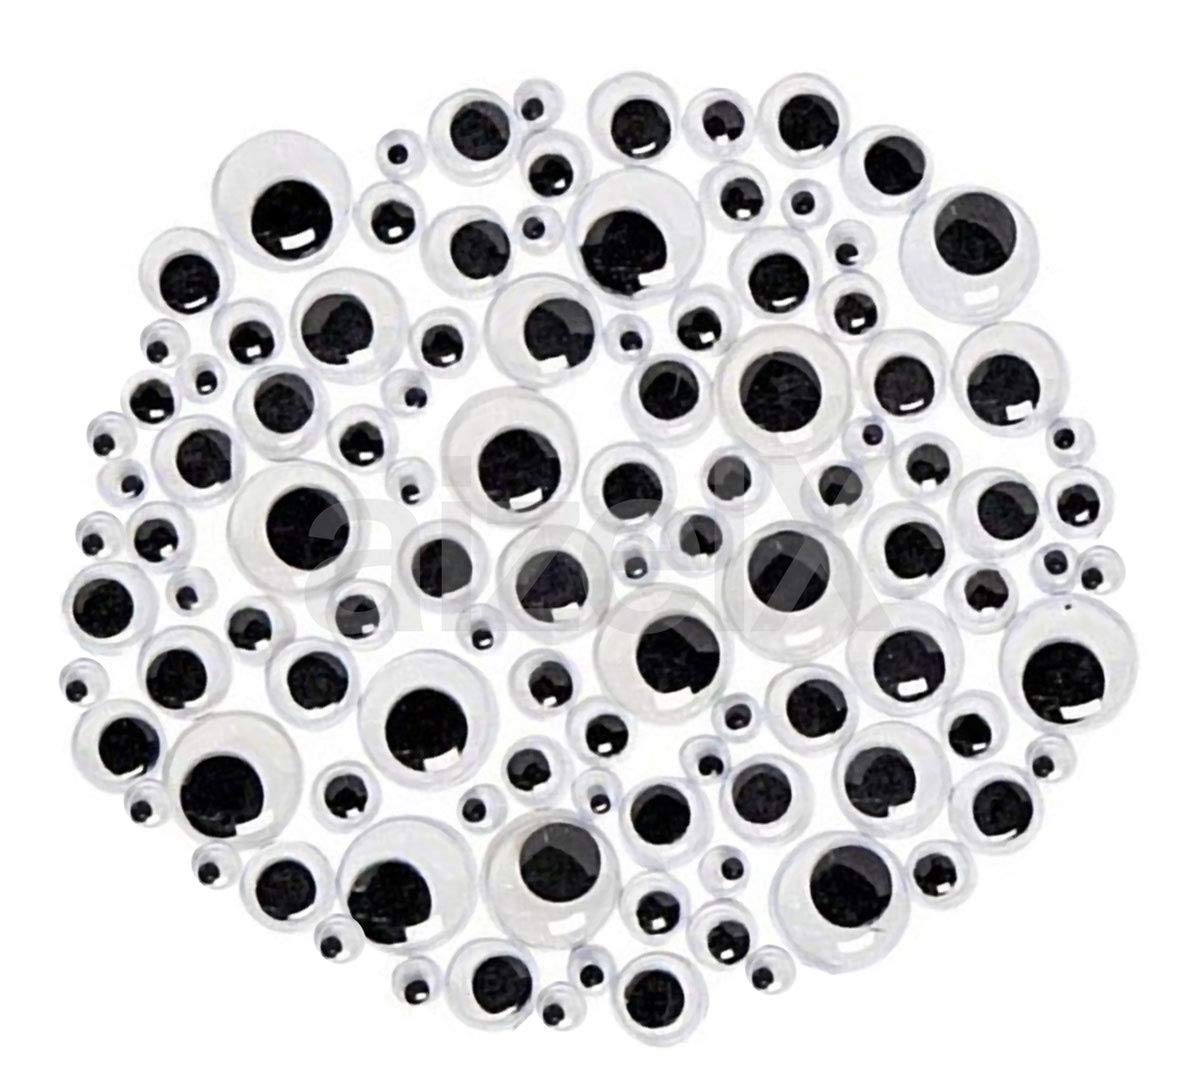 3A Featuretail Googly Eyes/Wiggle Eyes/Doll Eyes for Art and Craft